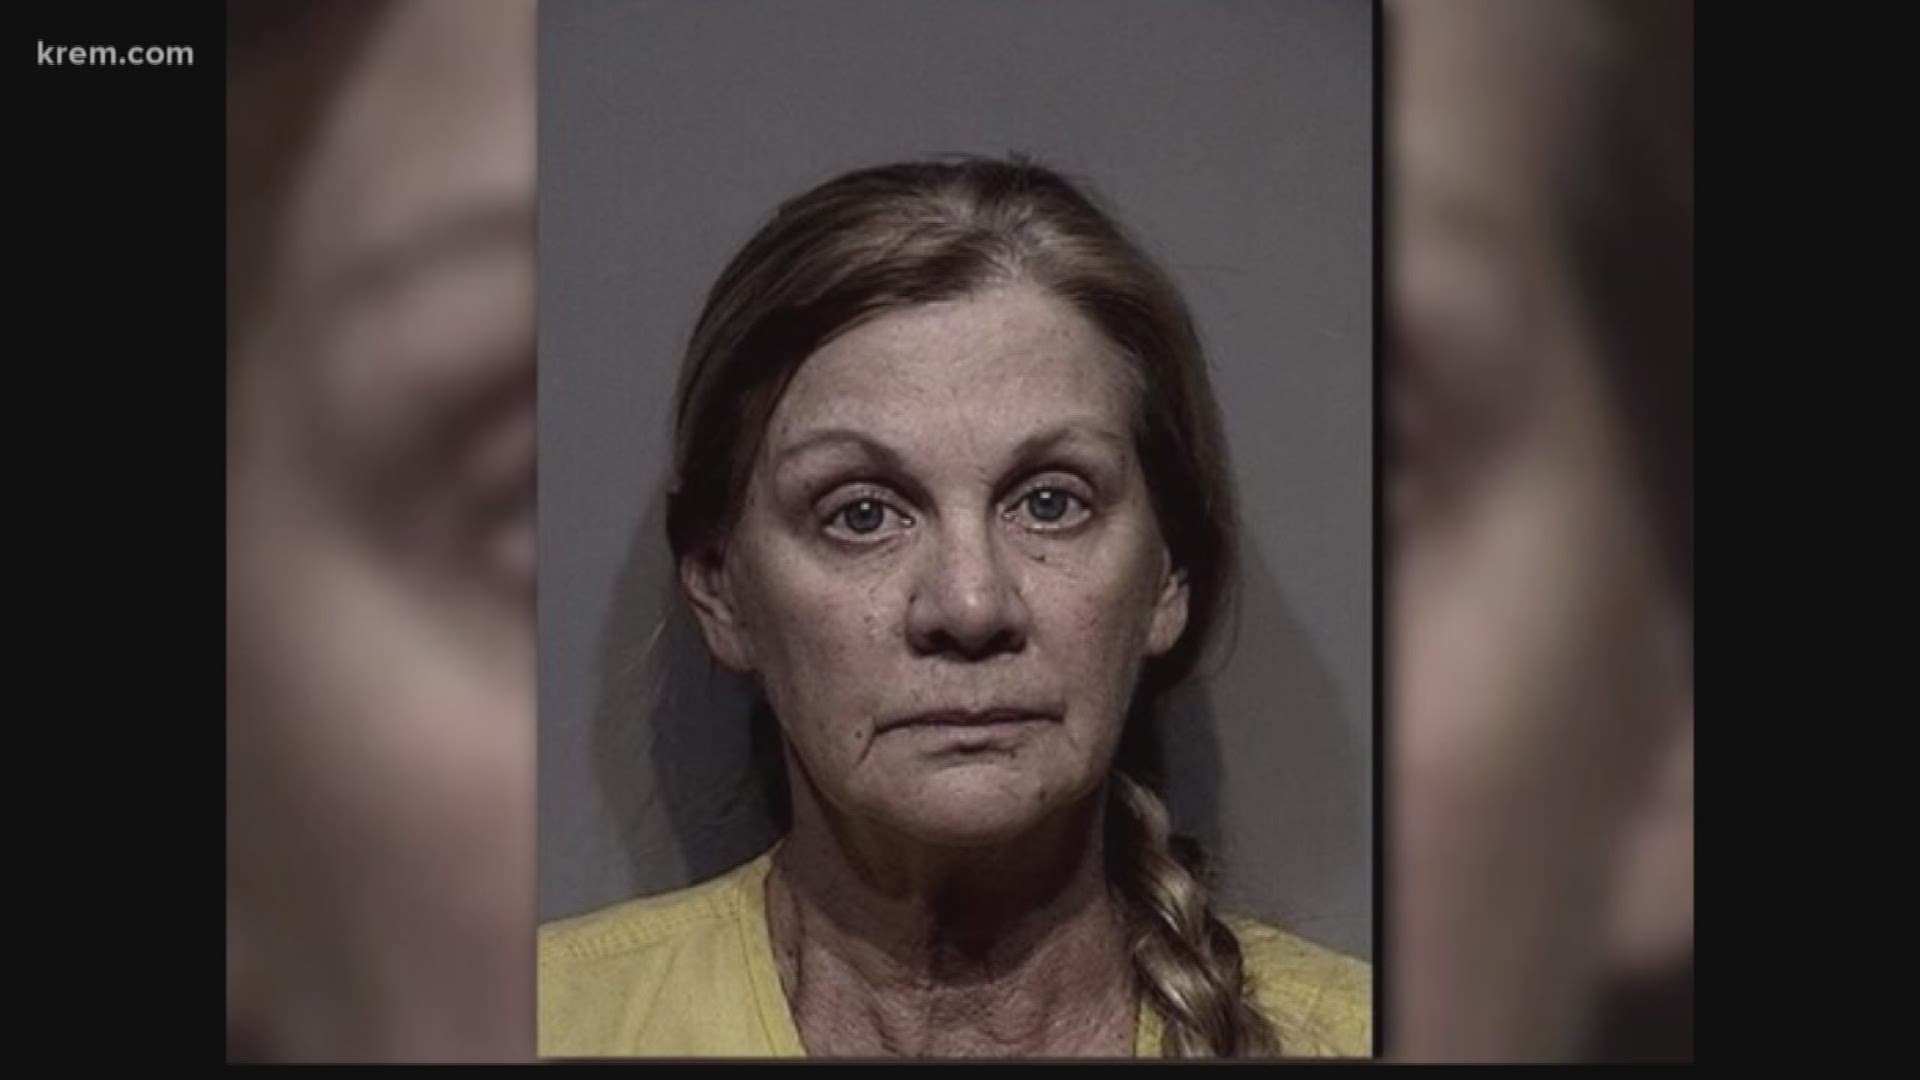 Warrant issued after woman accused of stealing from N. Idaho nonprofit fails to appear in court (5-25-18)